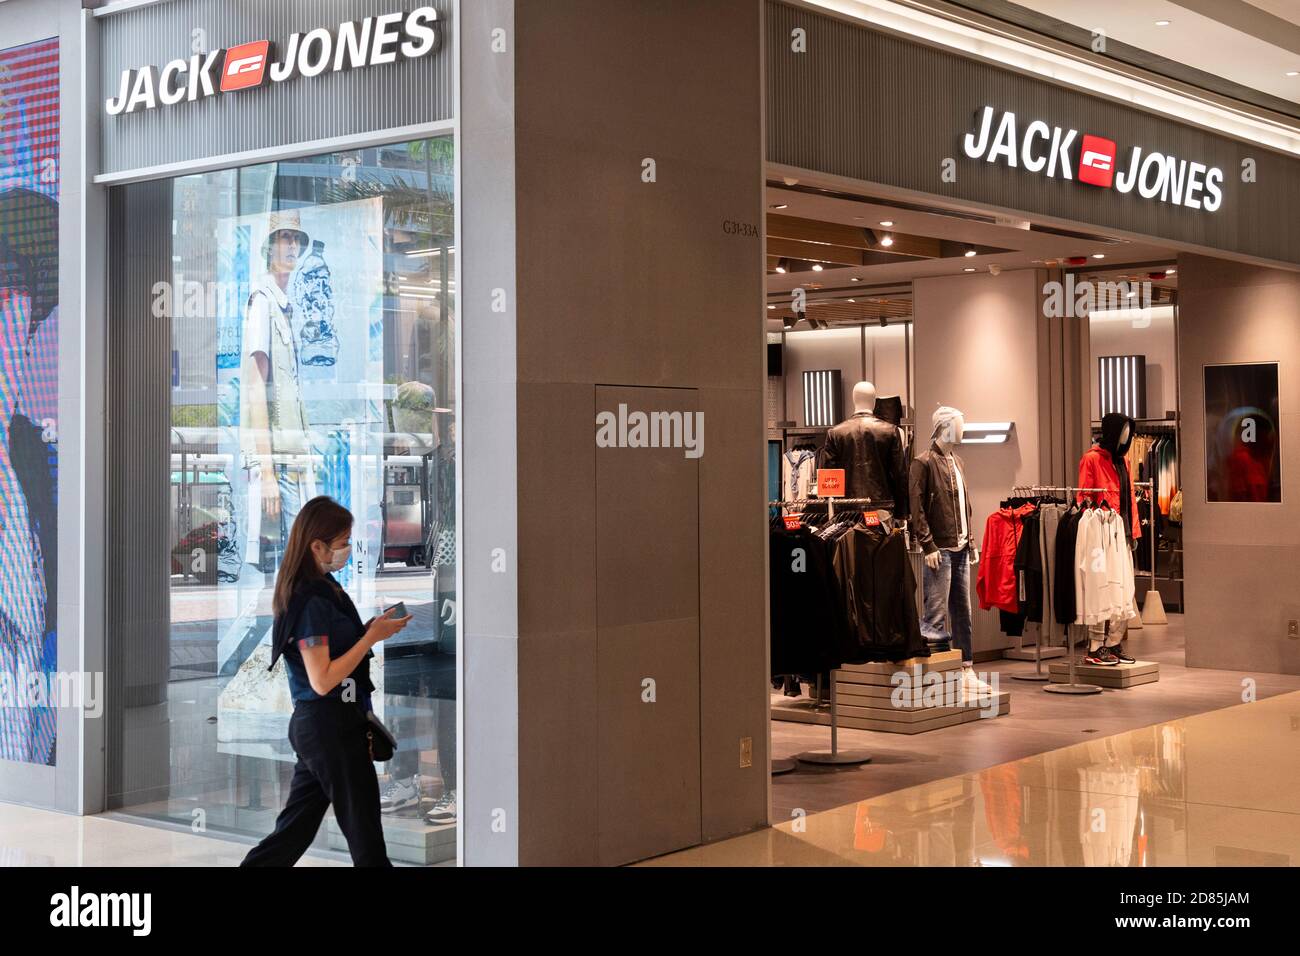 Page 2 - Jack Jones High Resolution Stock Photography and Images - Alamy